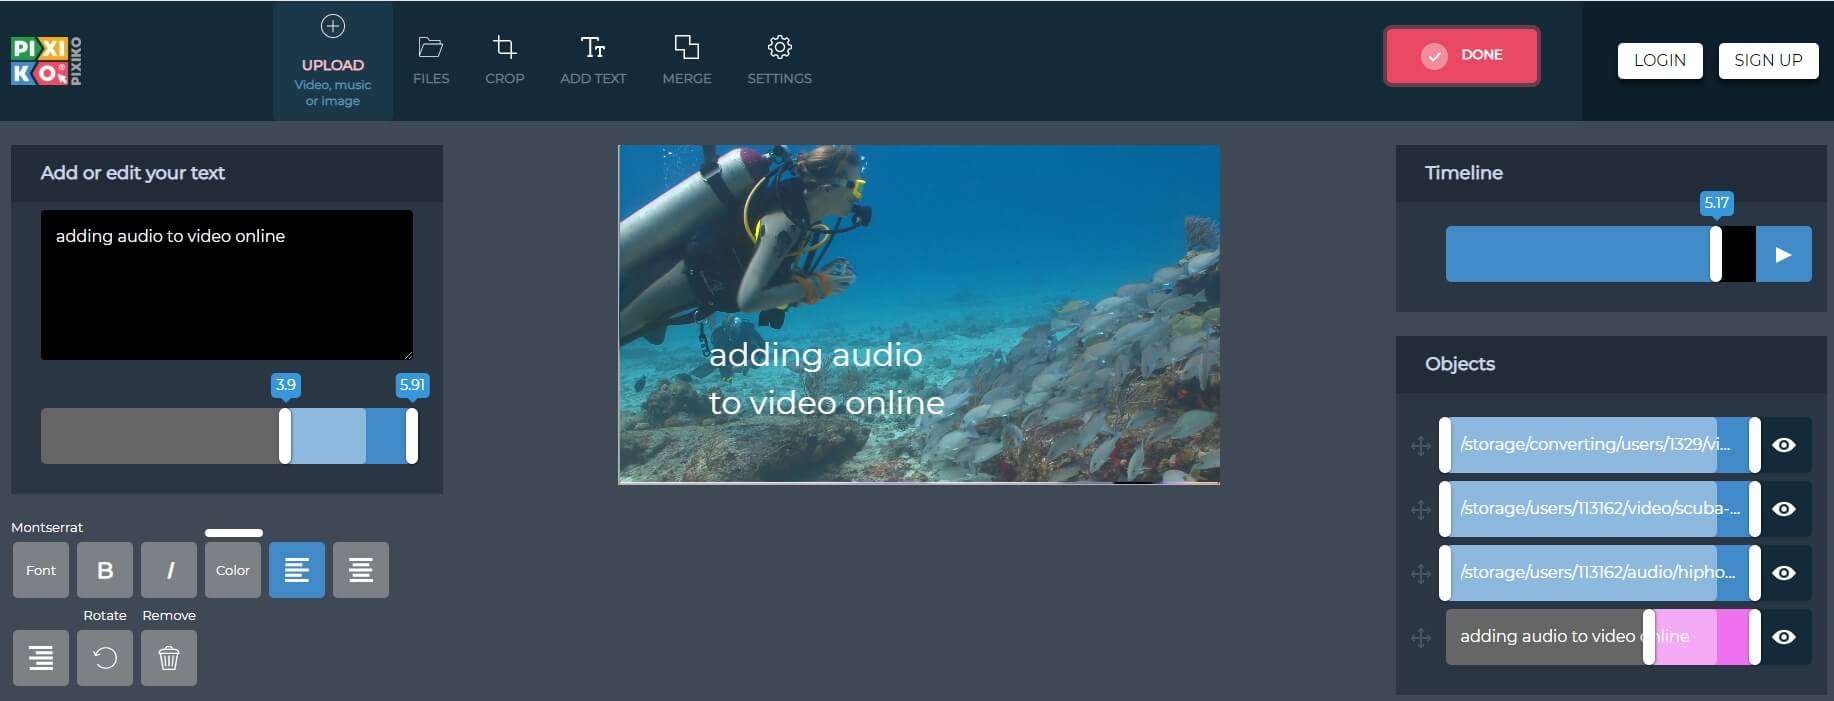 add audio to video with pixiko  